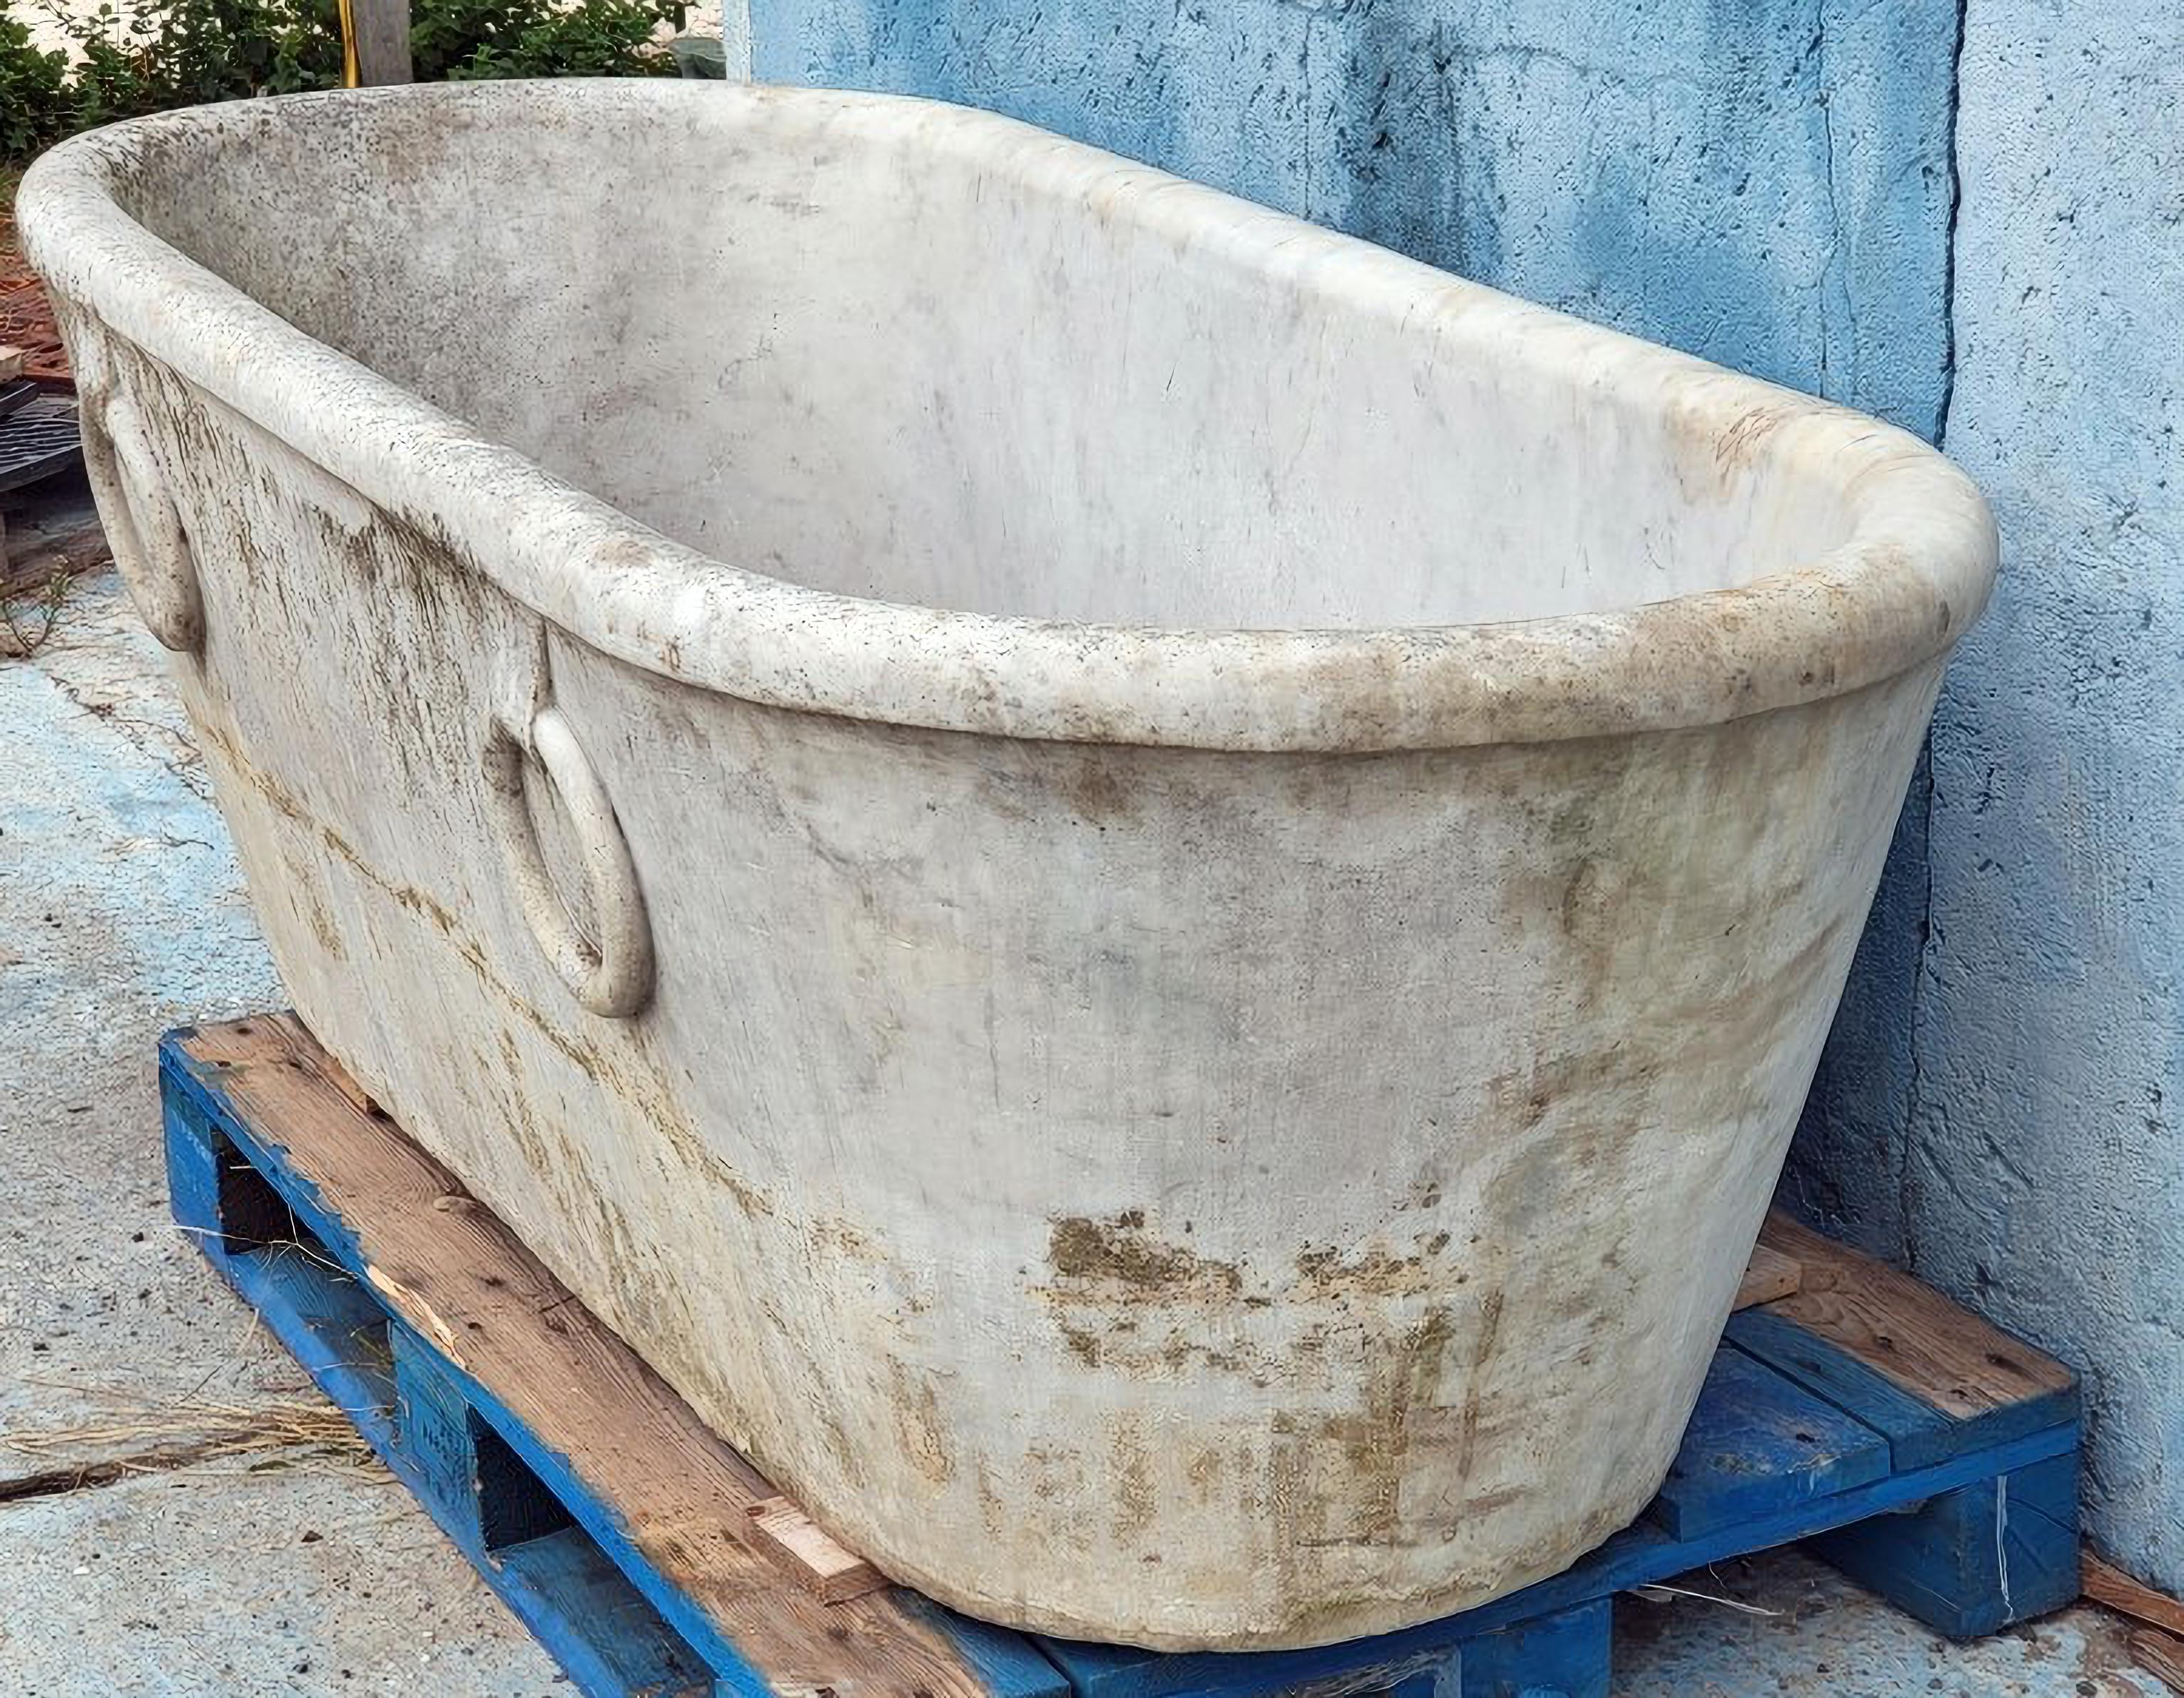 ANTIQUE BATHTUB IN CARRARA WHITE MARBLE WITH RINGS 18th Century
HEIGHT 60 cm
WIDTH 76 cm
LENGTH 176 cm
INTERNAL DEPTH OF THE BASIN 50 cm
WEIGHT 300 Kg
MANUFACTURE 18th Century
MATERIAL White Carrara marble
INTERNAL MEASURES 160 X 71 cm.